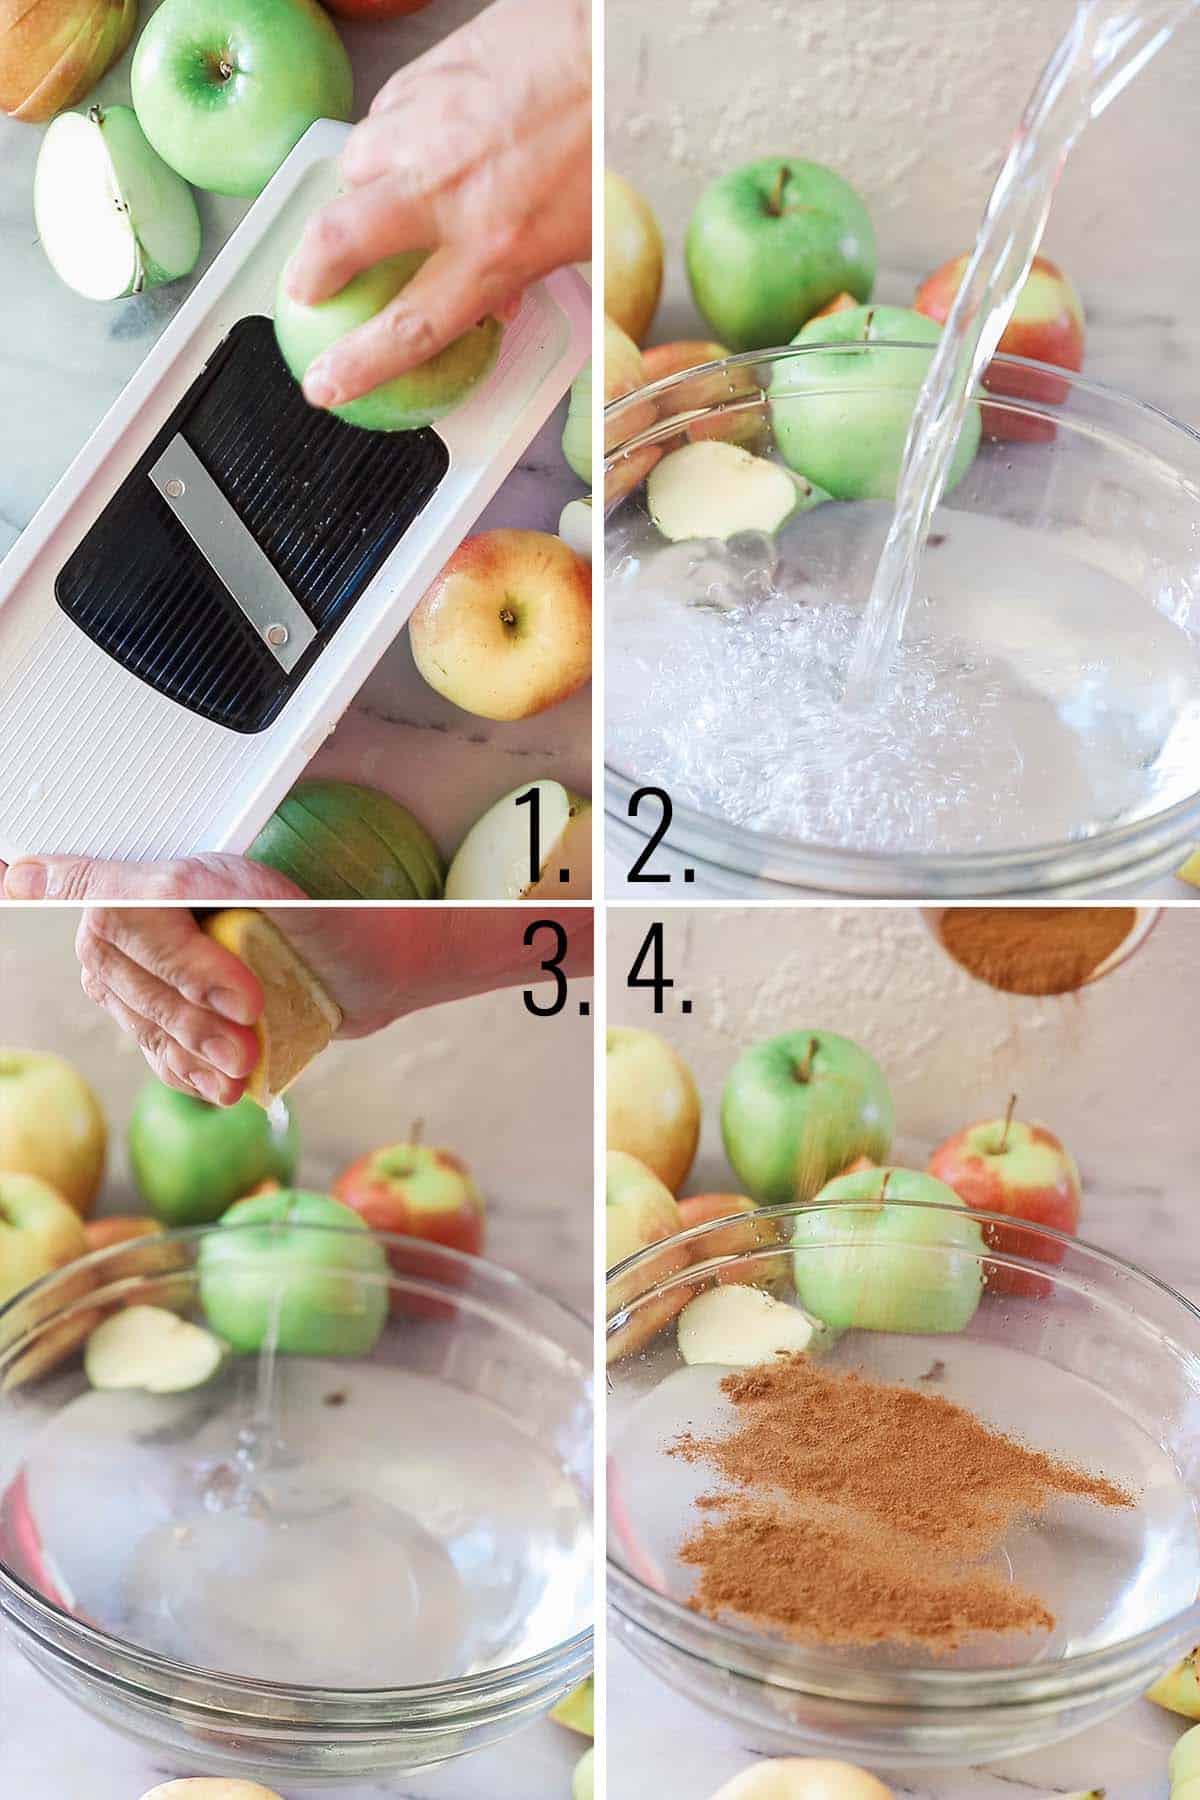 How to make and soak apple chips.